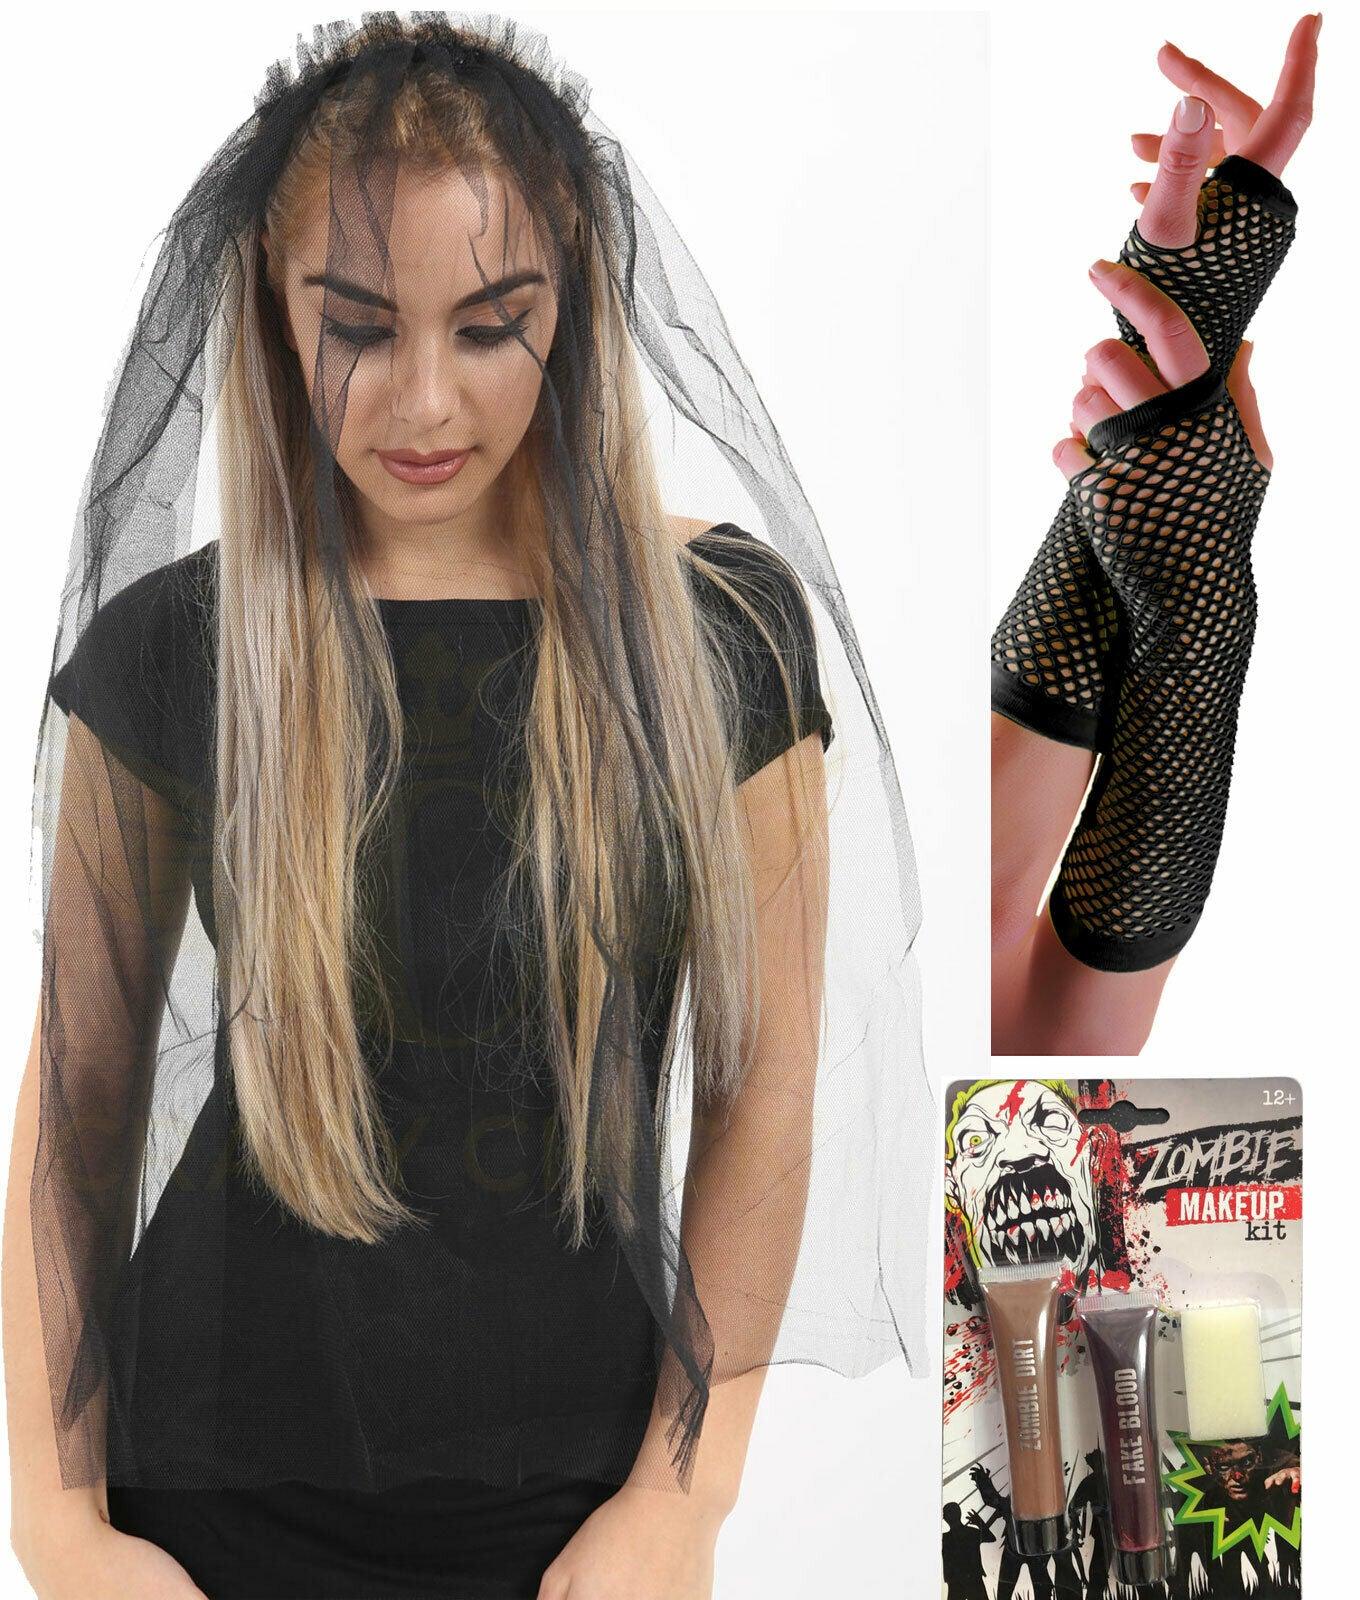 Veil on Hair Band Fishnet Gloves Make Up Halloween Zombie Bride Costume - Labreeze